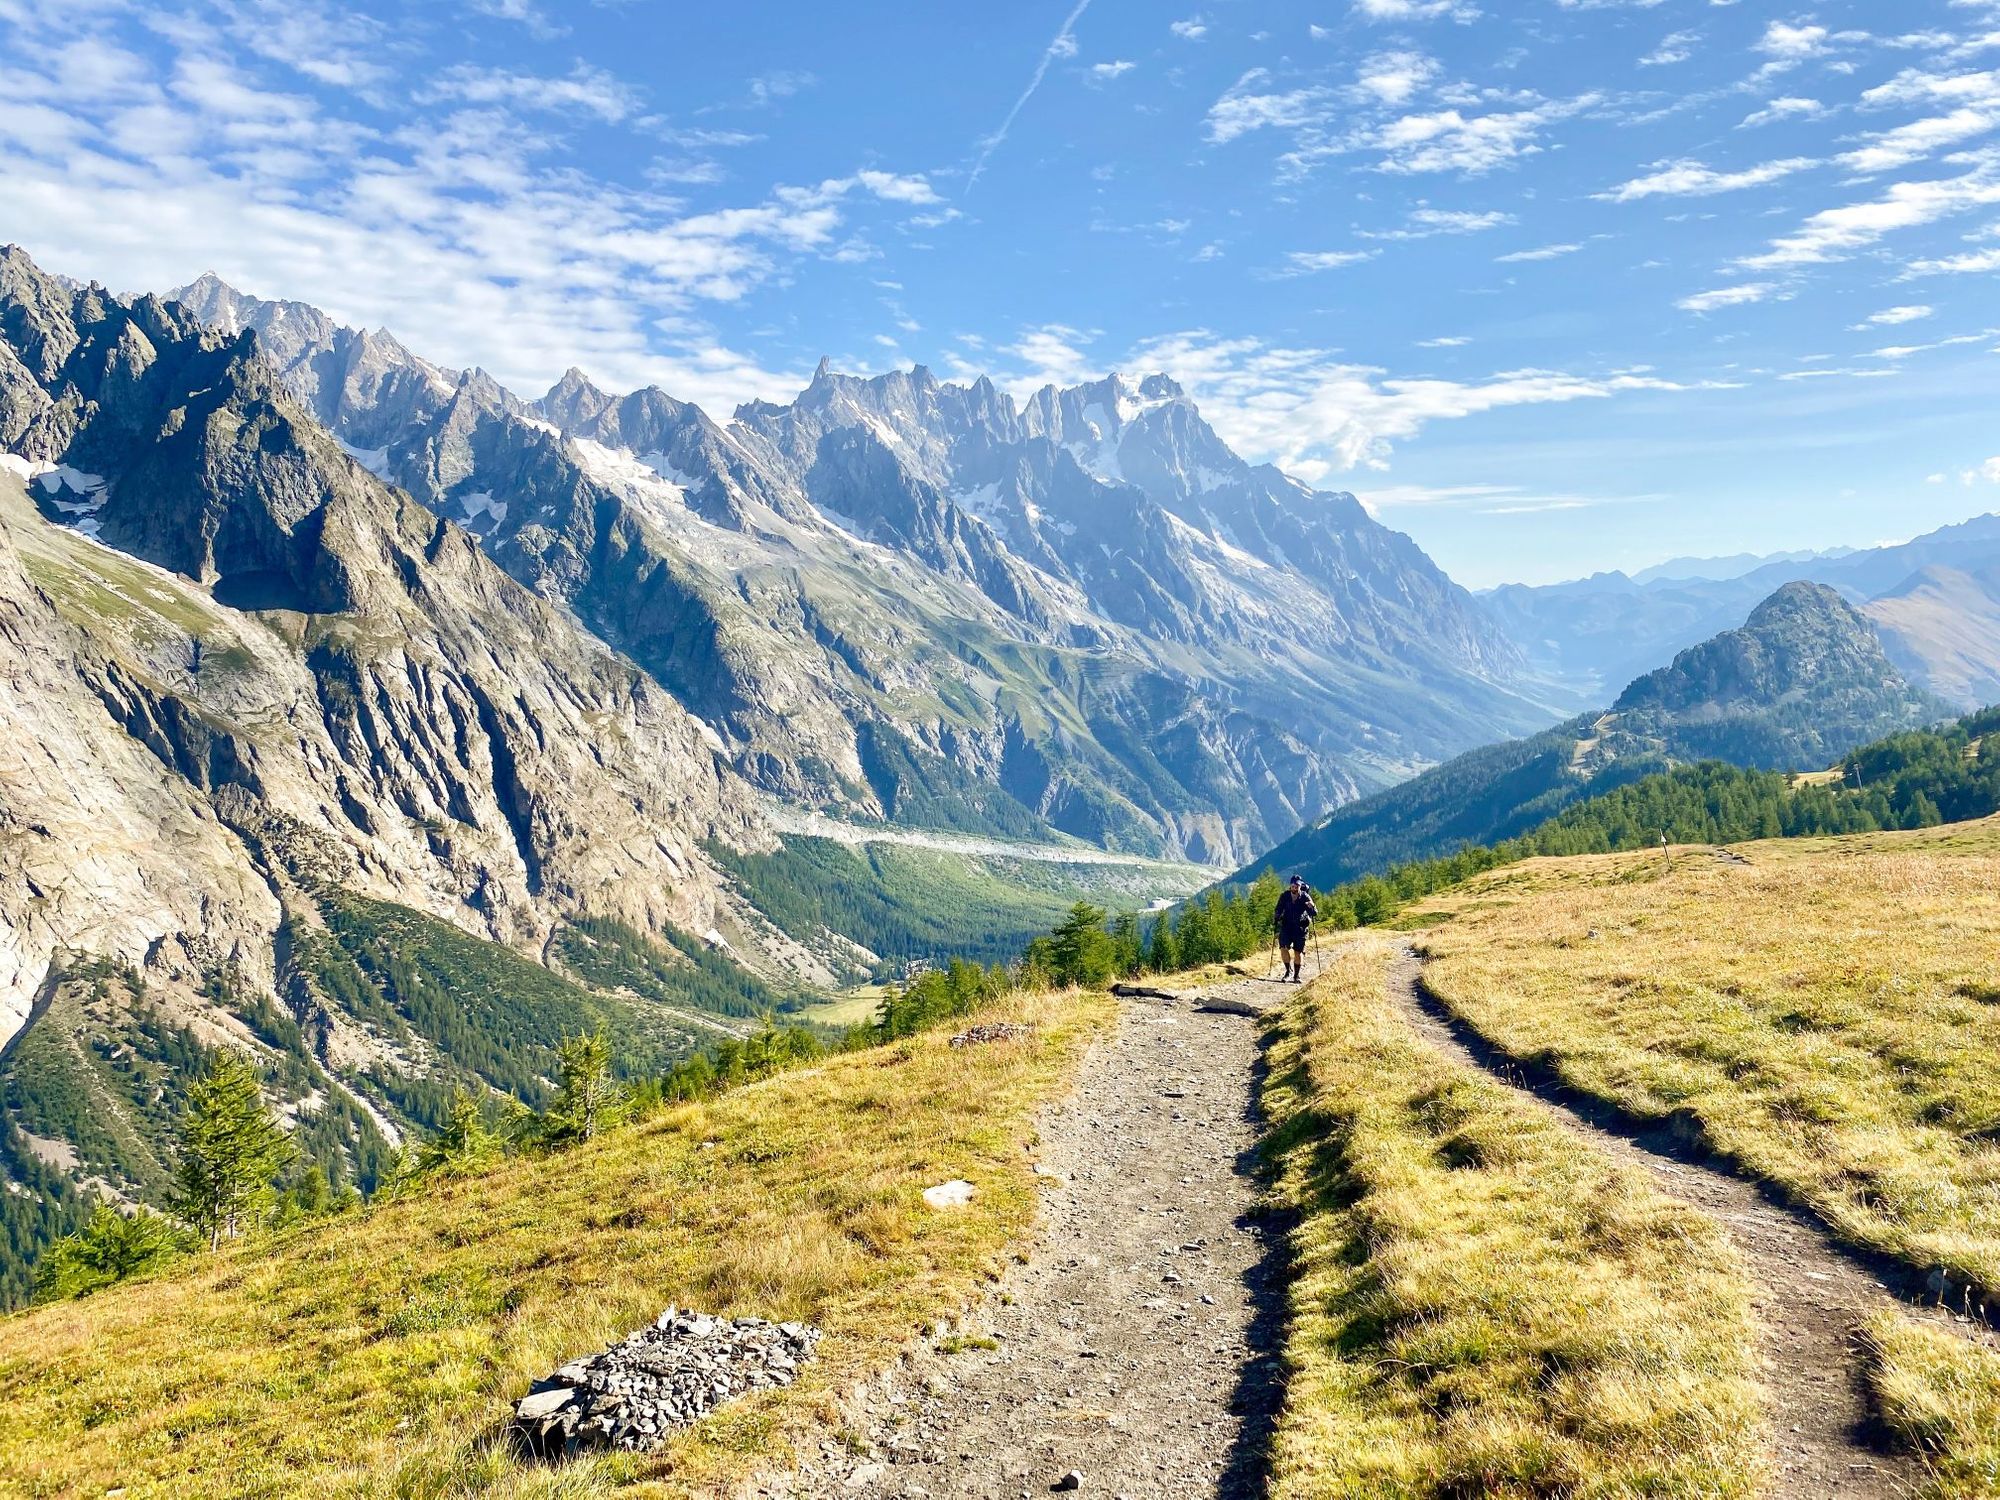 The remarkable views on the Tour du Mont Blanc hiking route. 